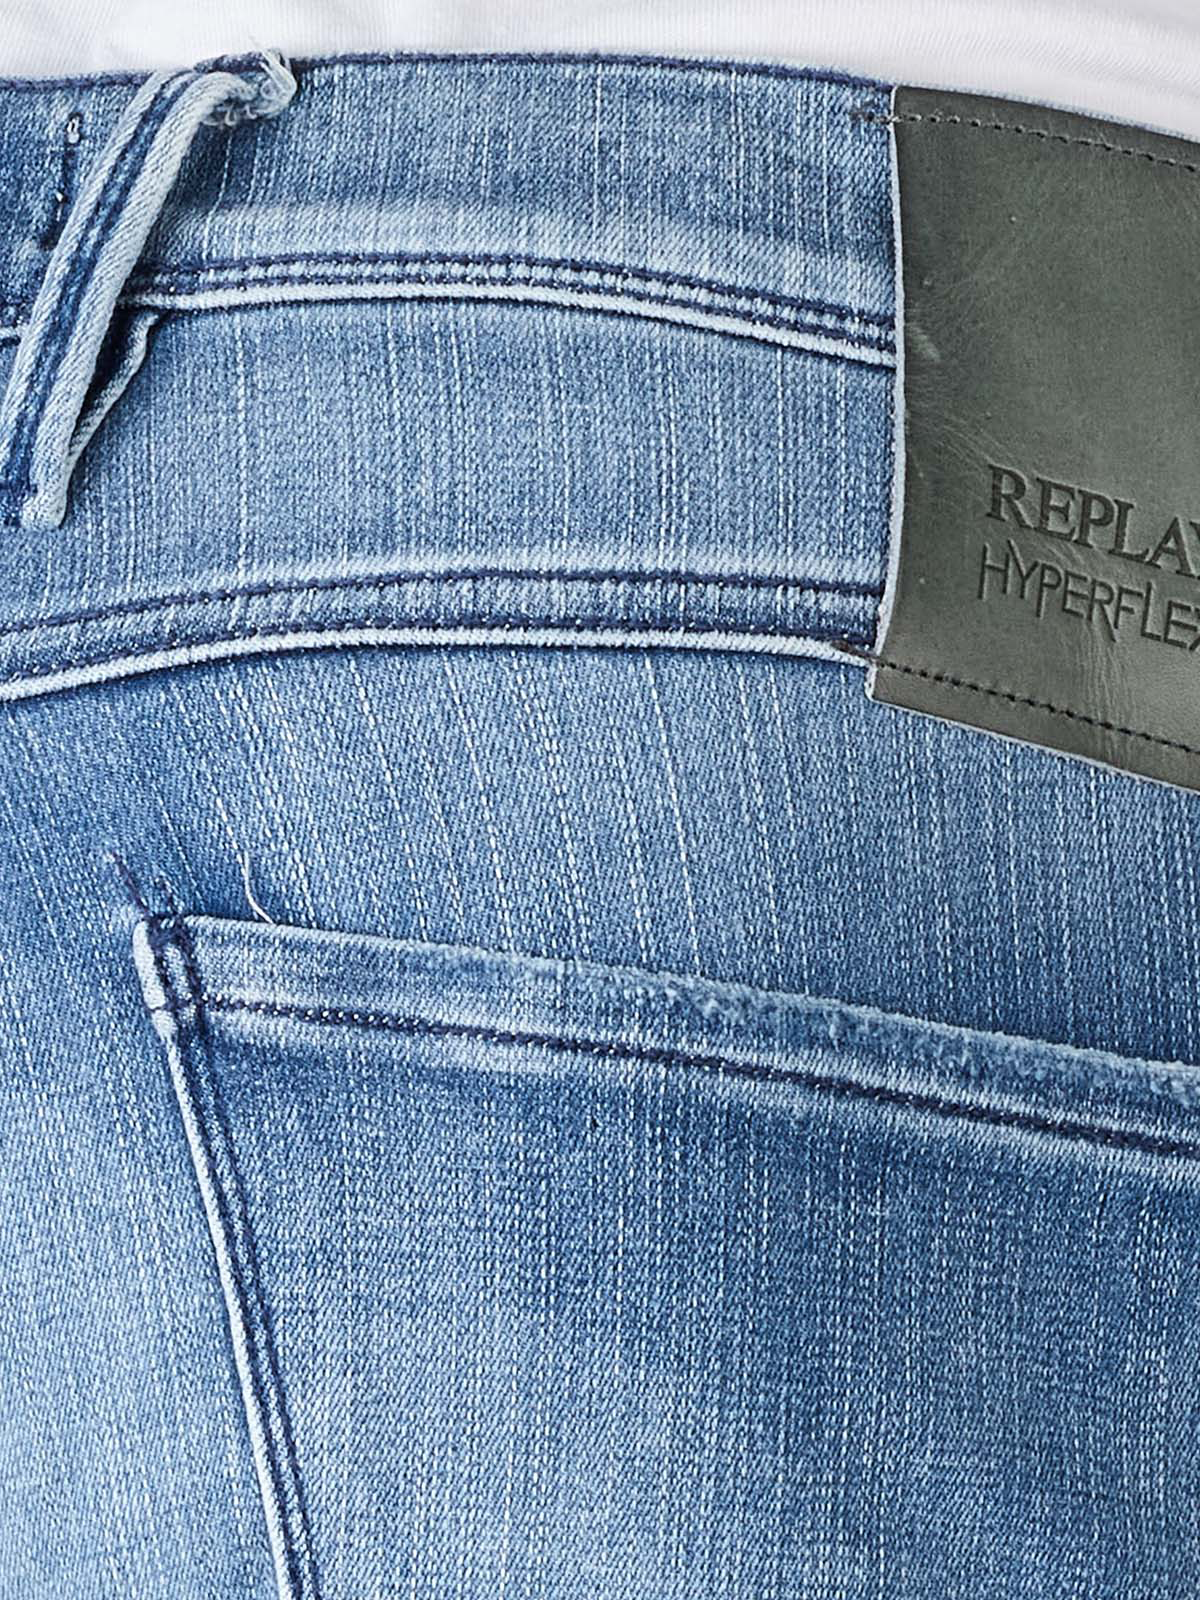 1156-replay-men-jeans-blue-denim-straight-fit-m914y-661-wi6-010-d.png